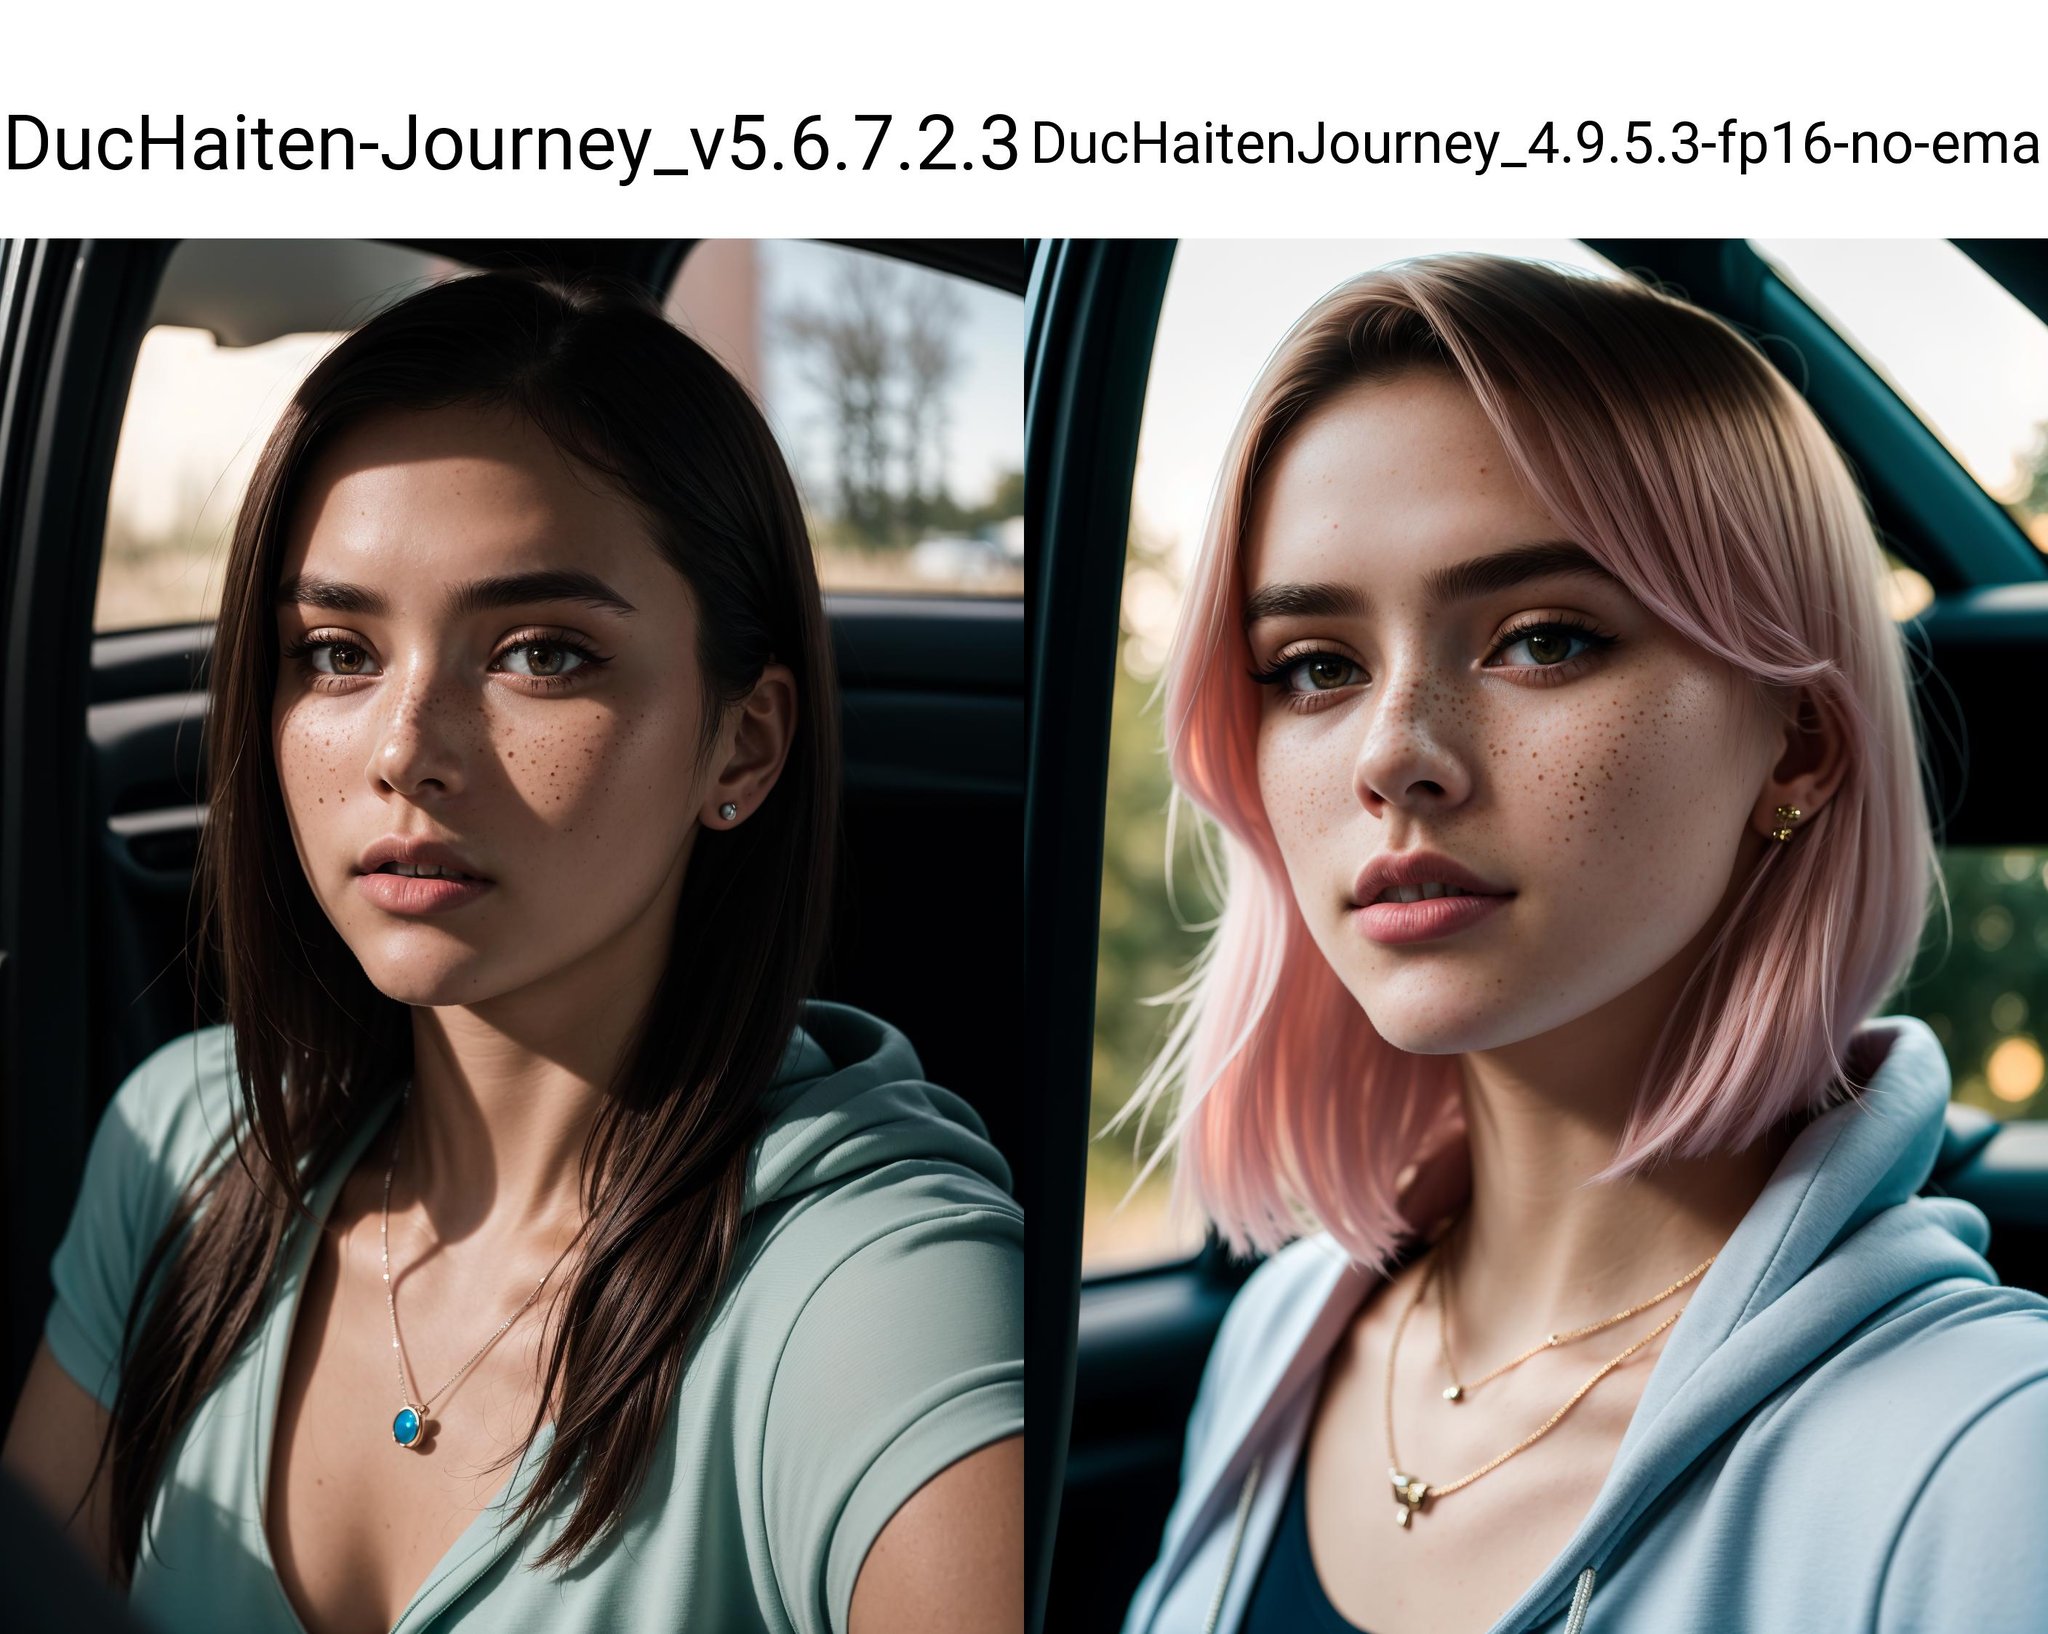 RAW photo, a 22-year-old-girl, upper body, selfie in a car, blue hoodie, (raecmbr-2650:0.9), (r4ec4mbr4:0.95), (1girl), (realistic), (photo-realistic:1.5), inside a car, driving, lipstick, freckles, (short hair), multicolor hair, necklace, (RAW photo, 8k uhd, film grain), Sharp Eyeliner, Blush Eyeshadow With Thick Eyelashes, extremely delicate and beautiful, 8k, soft lighting, high quality, highres, sharp focus, extremely detailed, during the day, (sunlight on face), beautiful detailed eyes, extremely detailed eyes and face, masterpiece, cinematic lighting, (high detailed skin:1.2), 8k uhd, dslr, soft lighting, high quality, film grain, Fujifilm XT3